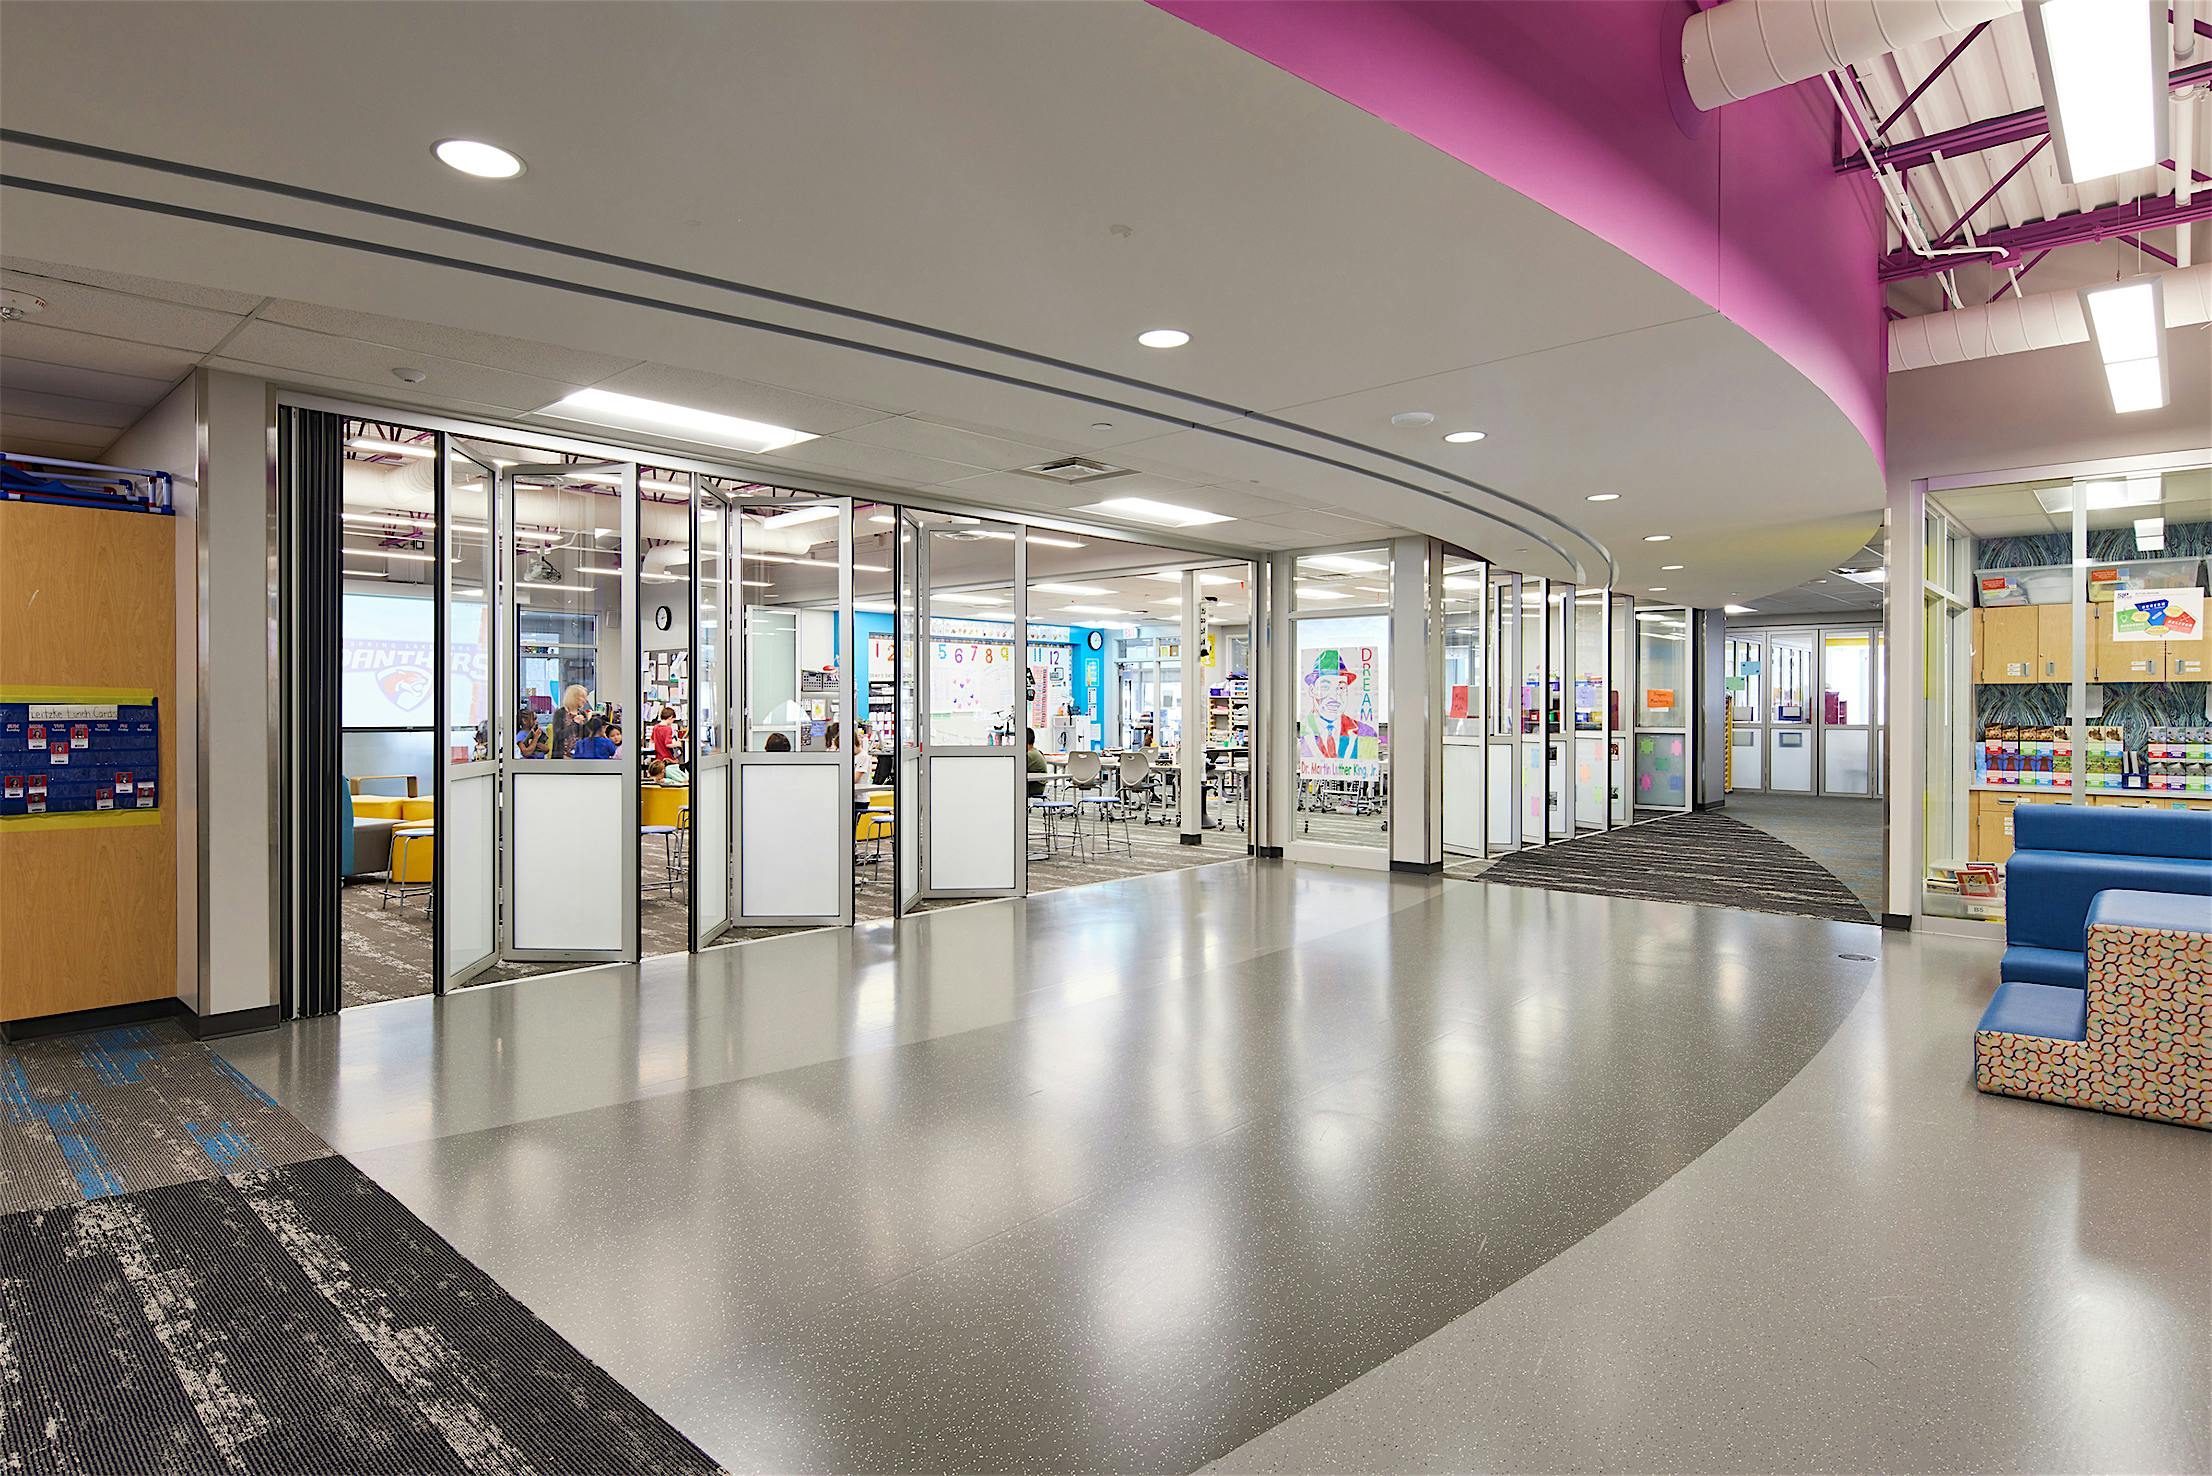 retractable glass wall systems for schools